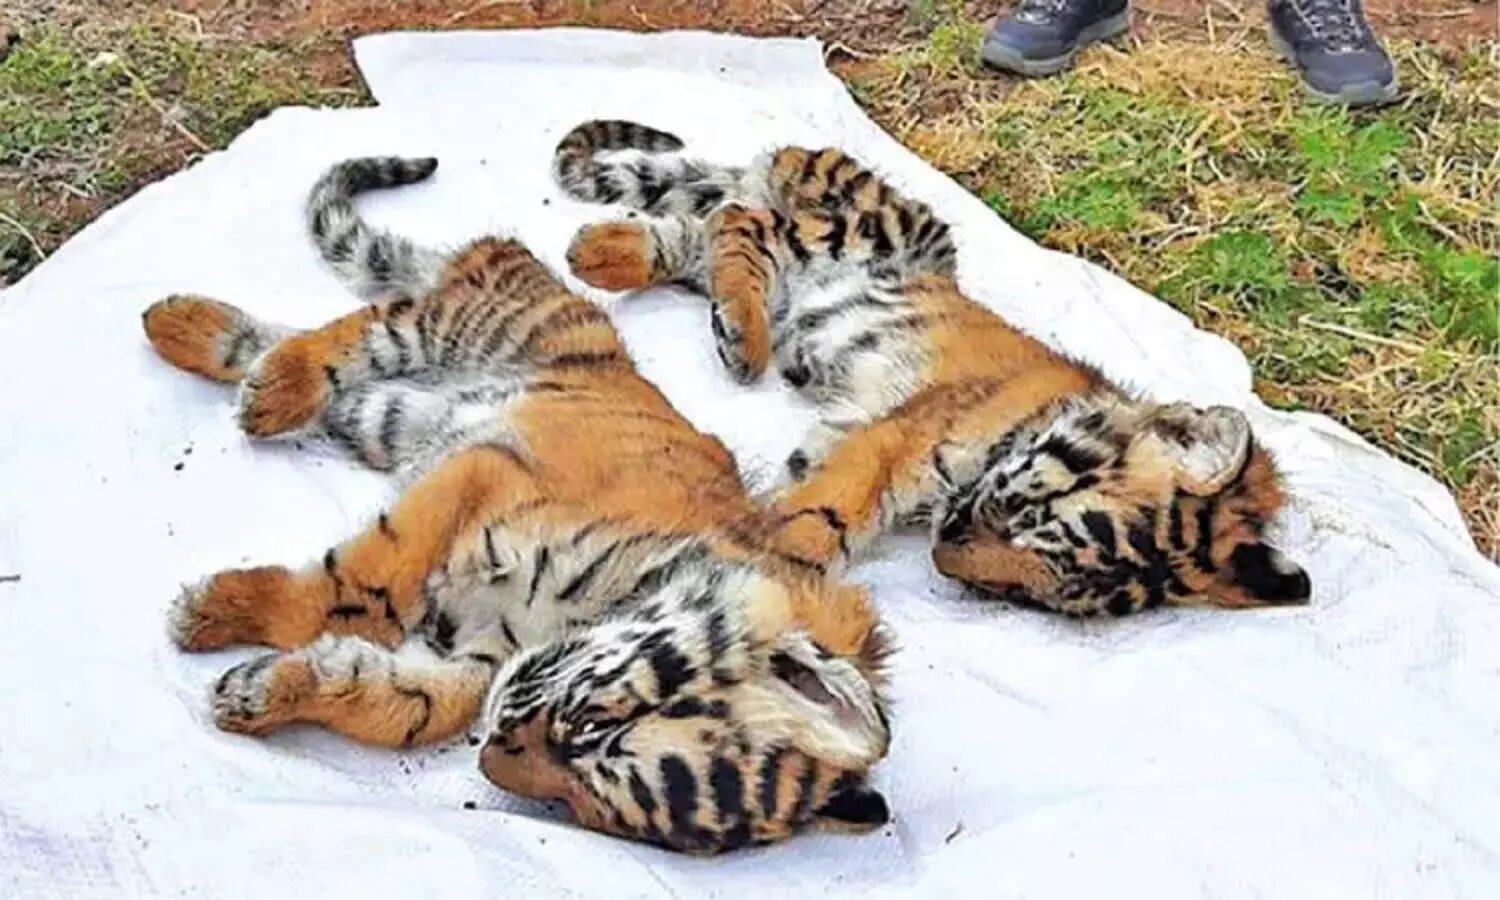 Two tiger cubs found dead